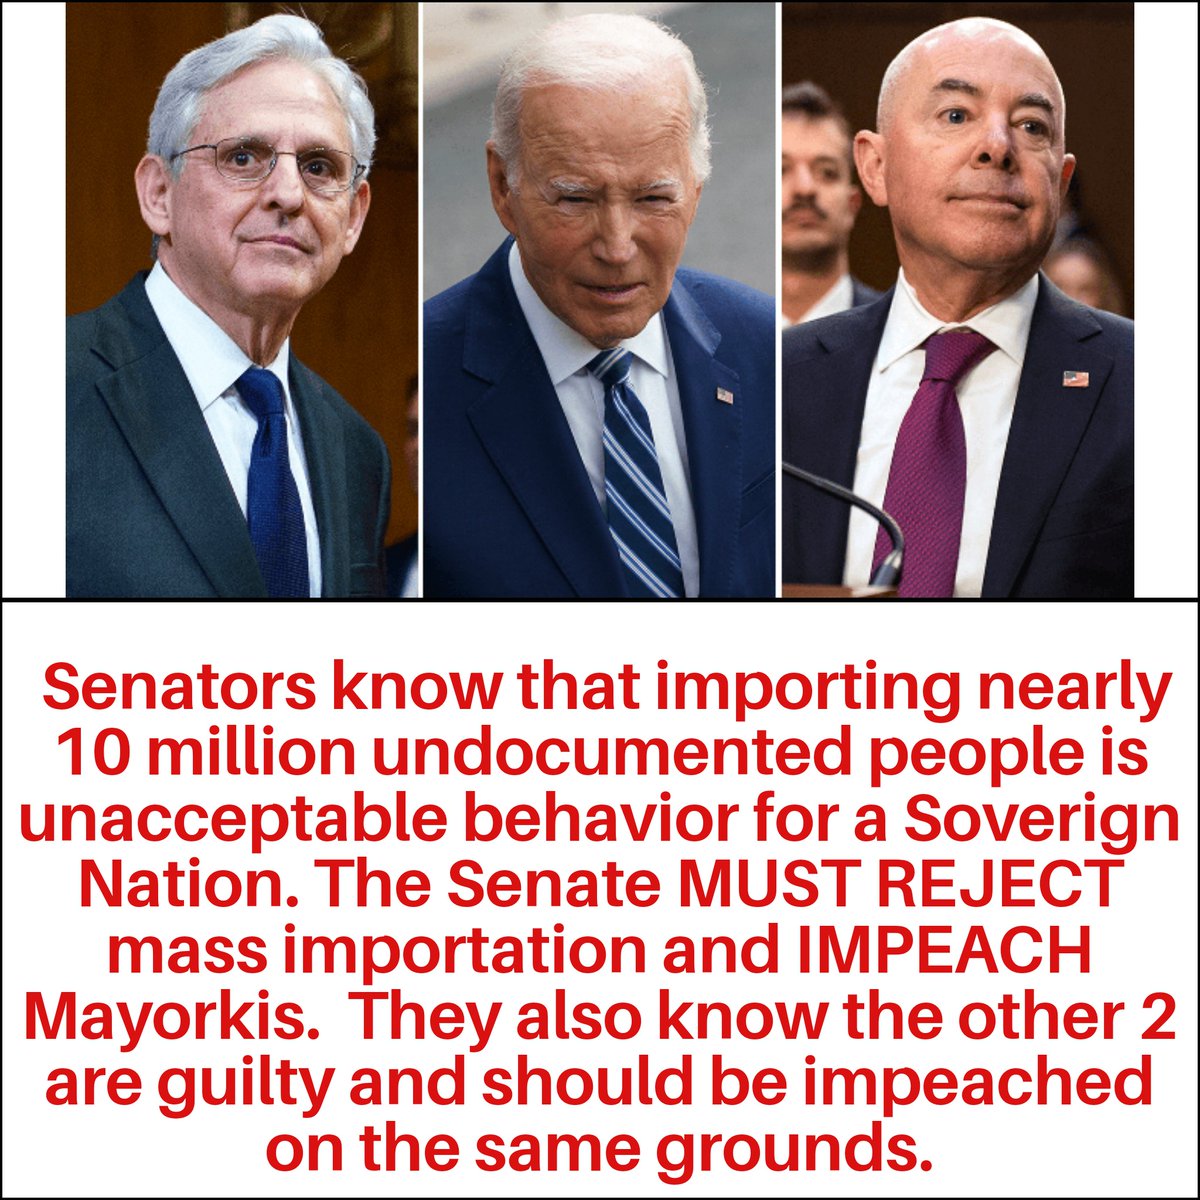 Waiting for the @SenateGOP & @SenateDems on @SecMayorkas #impeachment- Who puts #Soverignity, the #RuleOfLaw and #AmericanCitizens first. The vote should be 100-0 to #ImpeachMayorkas. 

Every #Retweet makes thus message resonate louder.  Can we get 1 million? Don't ignore this!